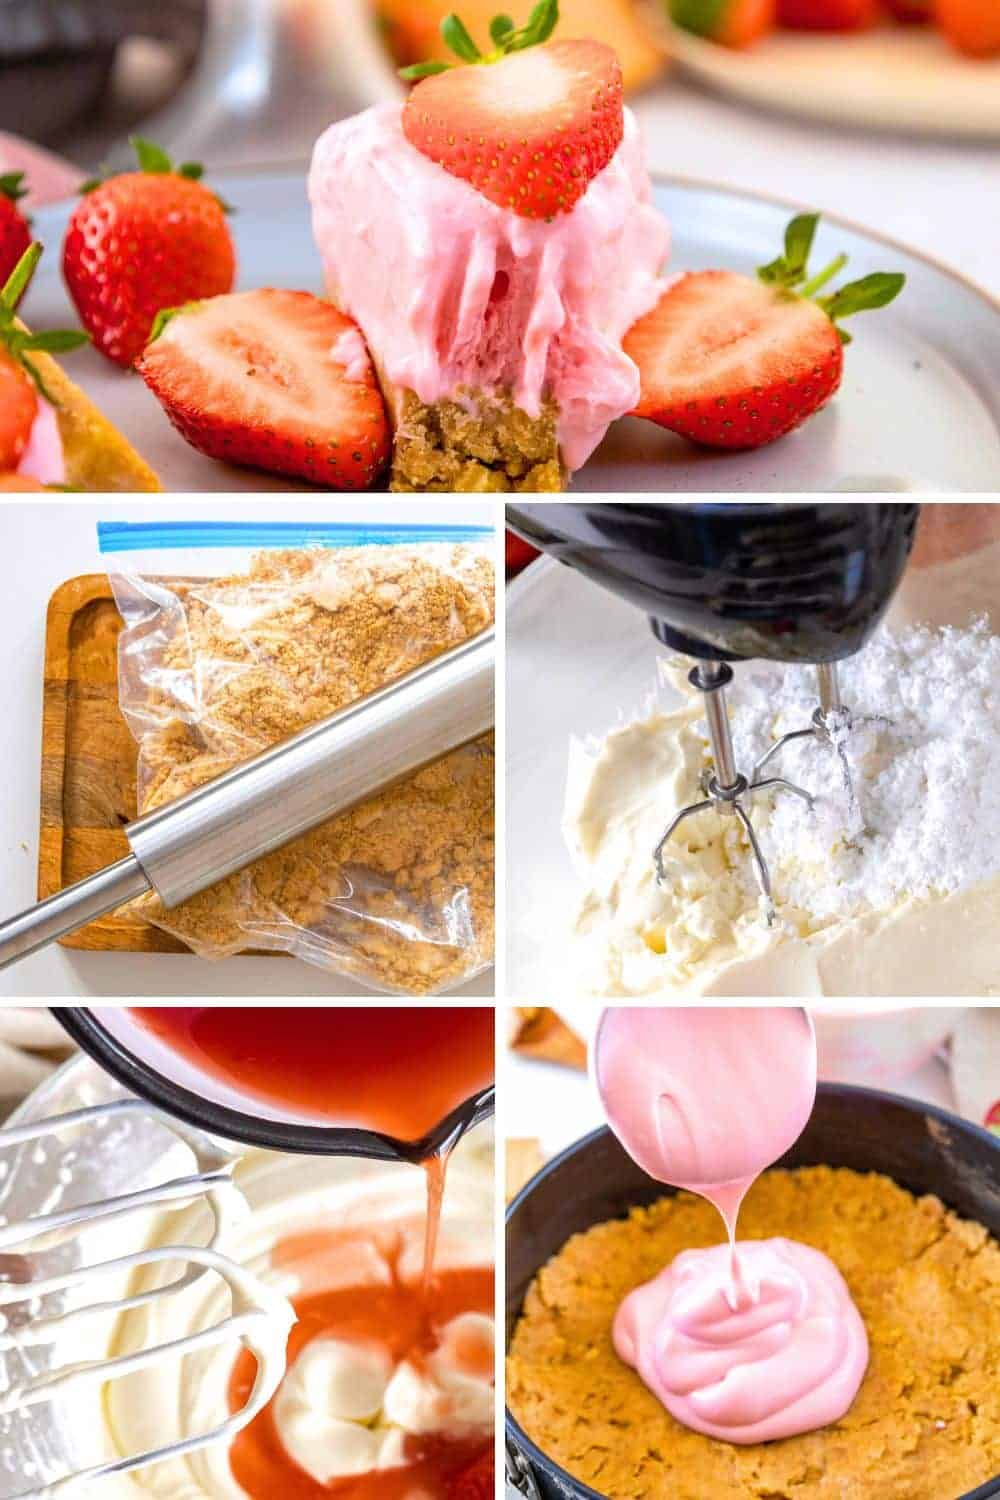 No Bake Strawberry Cheesecake Step By Step Recipe Instructions images of no bake cheesecake